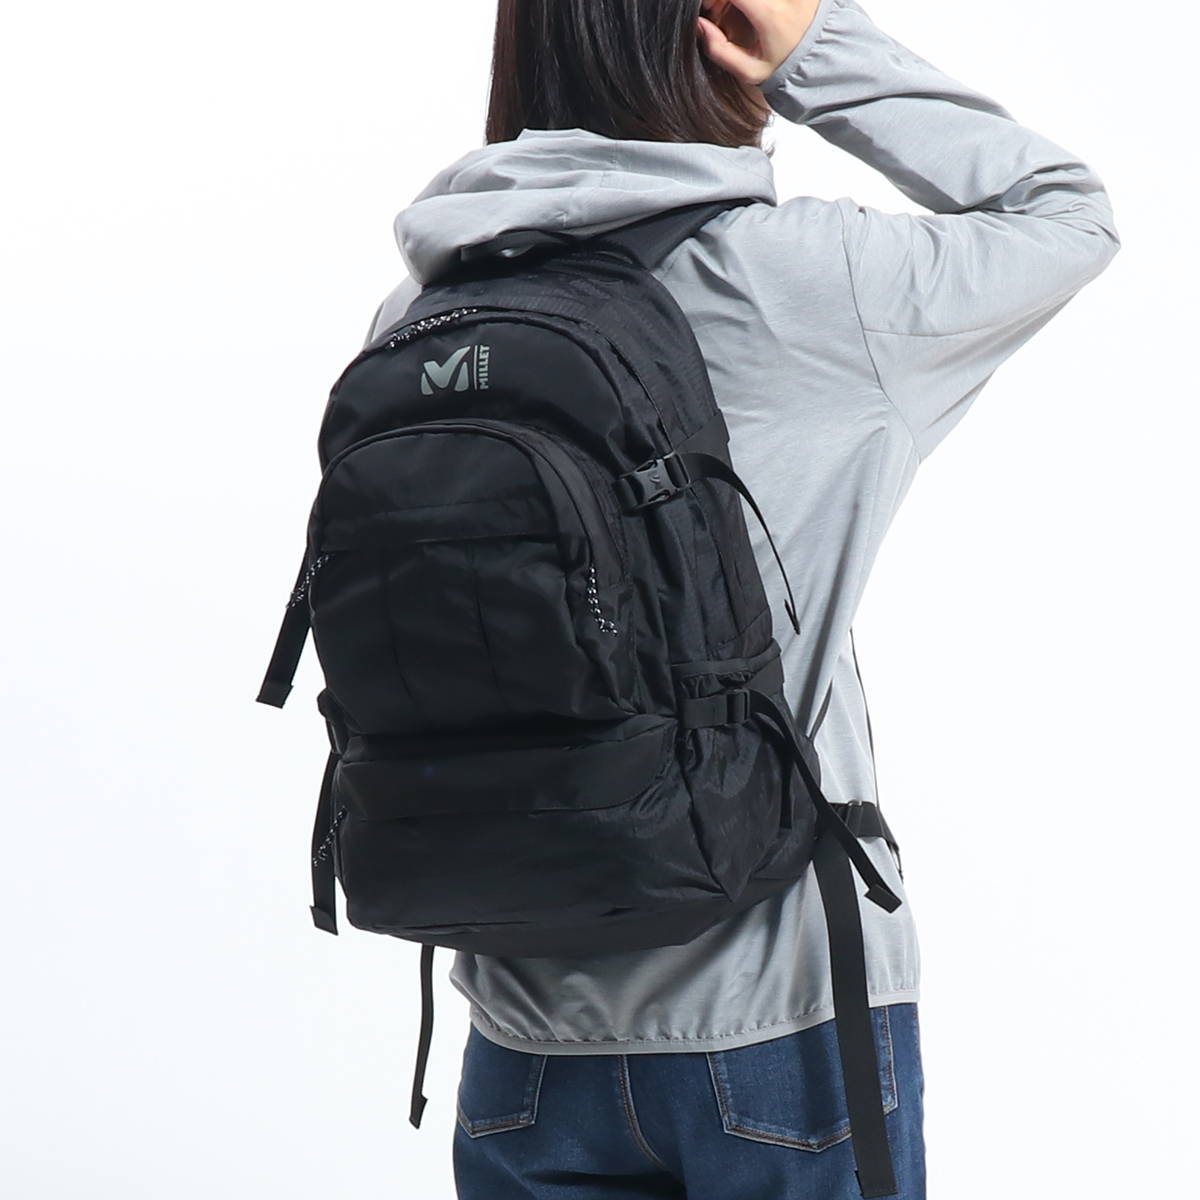 MILLET ミレー MARCHE20 バックパック 20L MIS0668｜【正規販売店